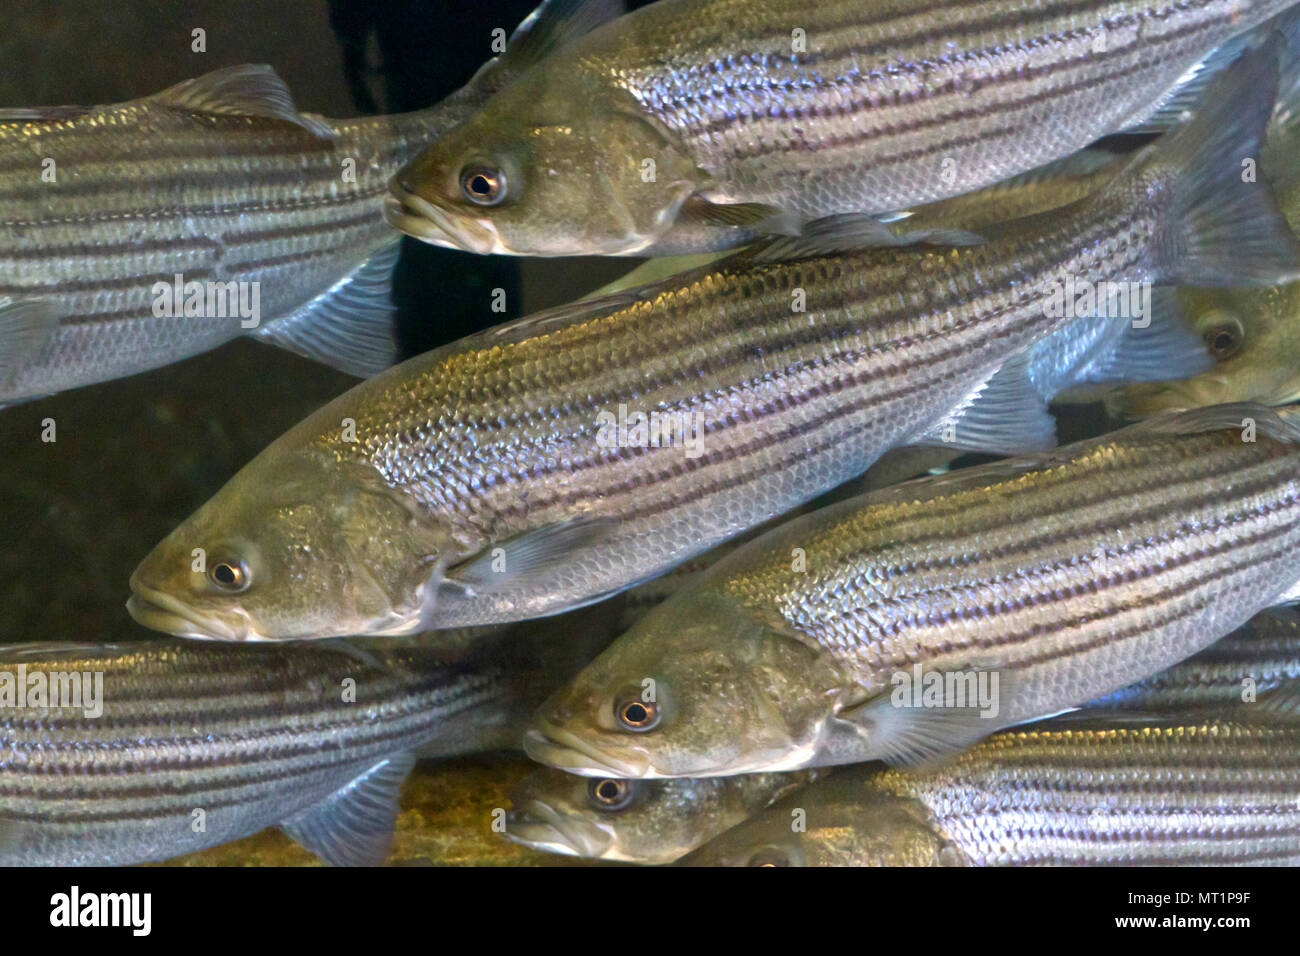 A crowded, underwater school of curious striped bass with shiny